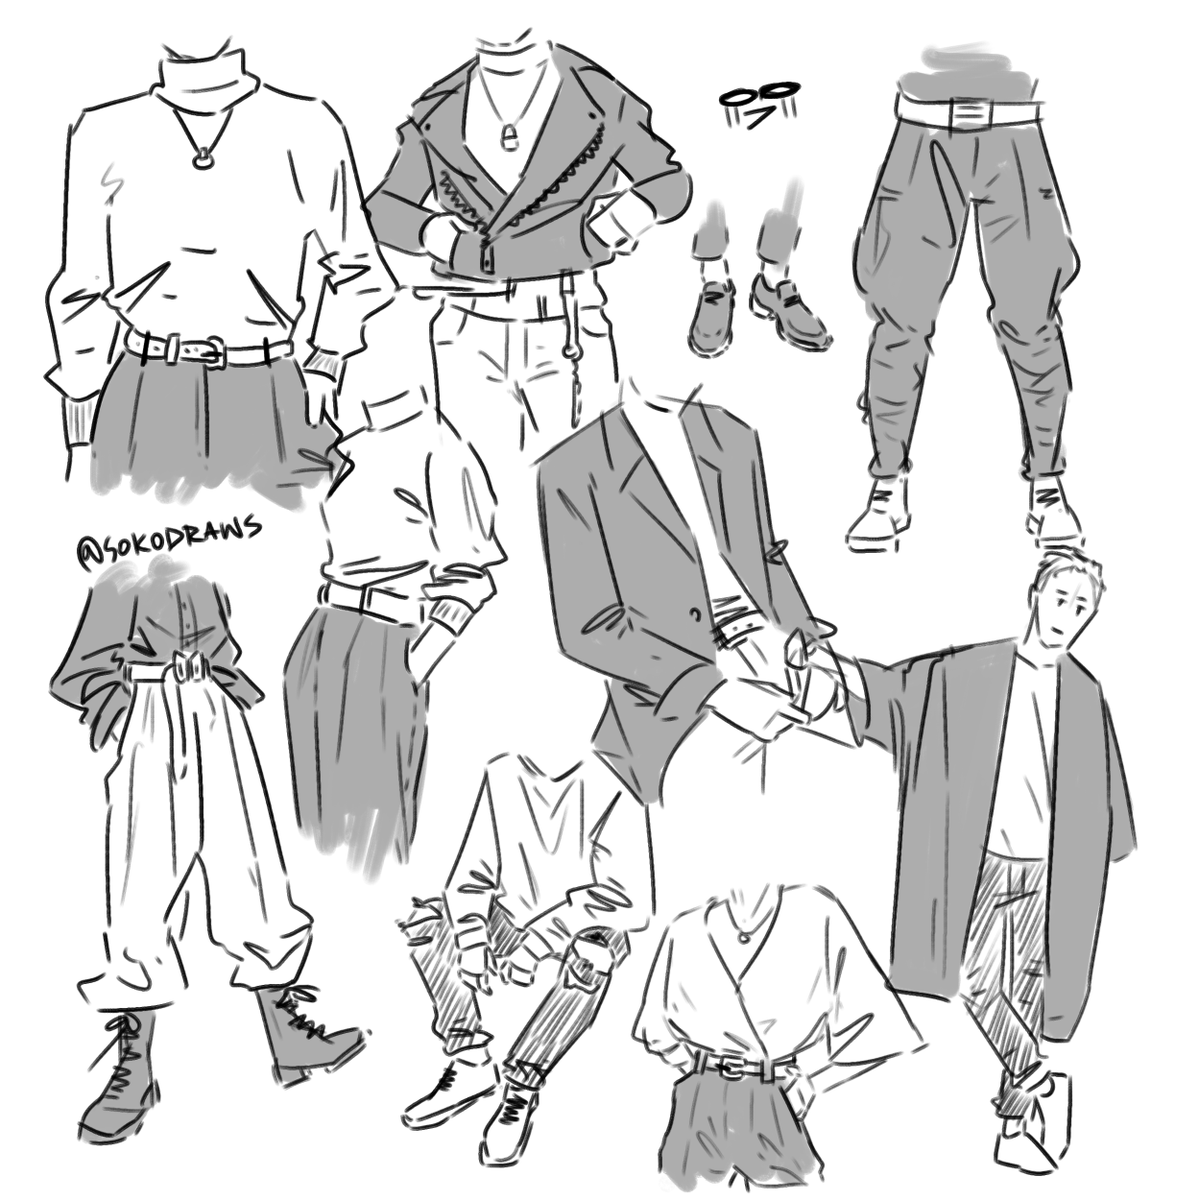 quick outfit studies
gave myself around 5min to doodle each outfit from a photo ref
good practice 